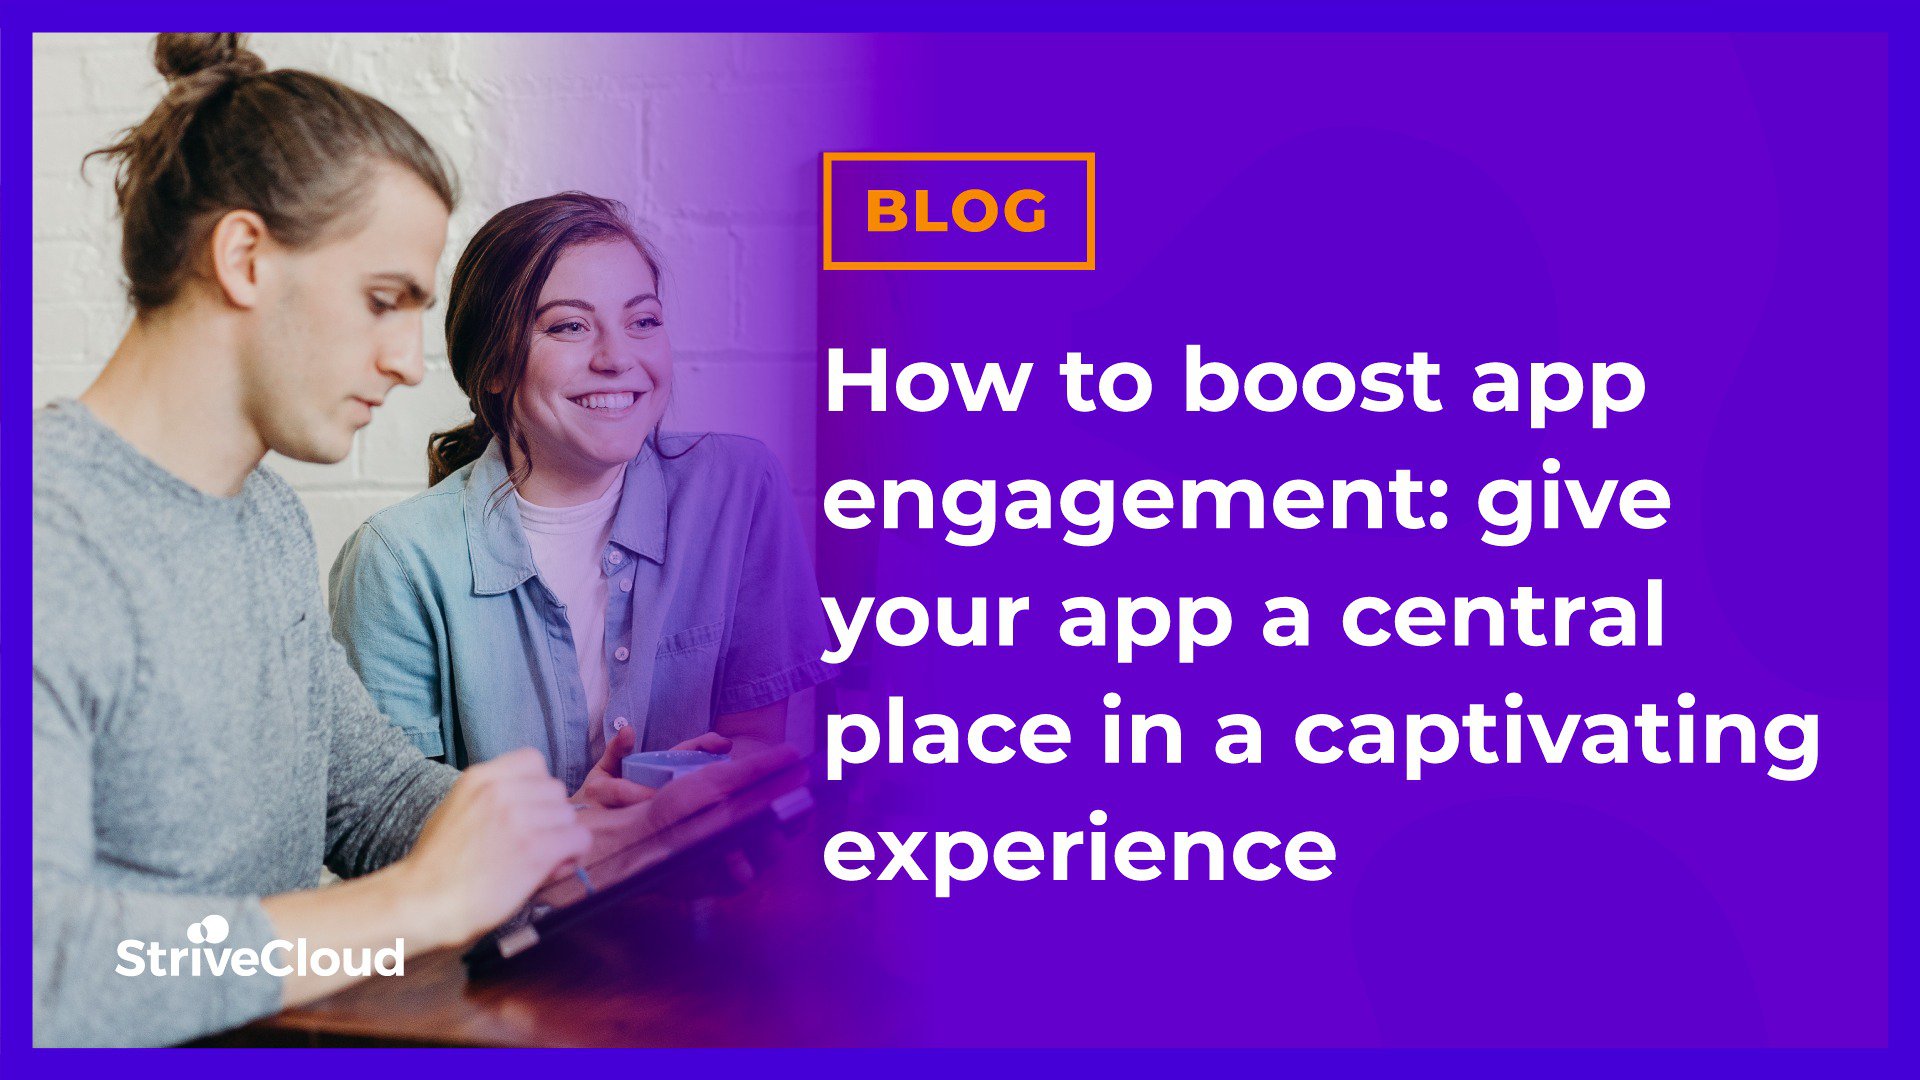 How to boost app engagement: give your app a central place in a captivating experience